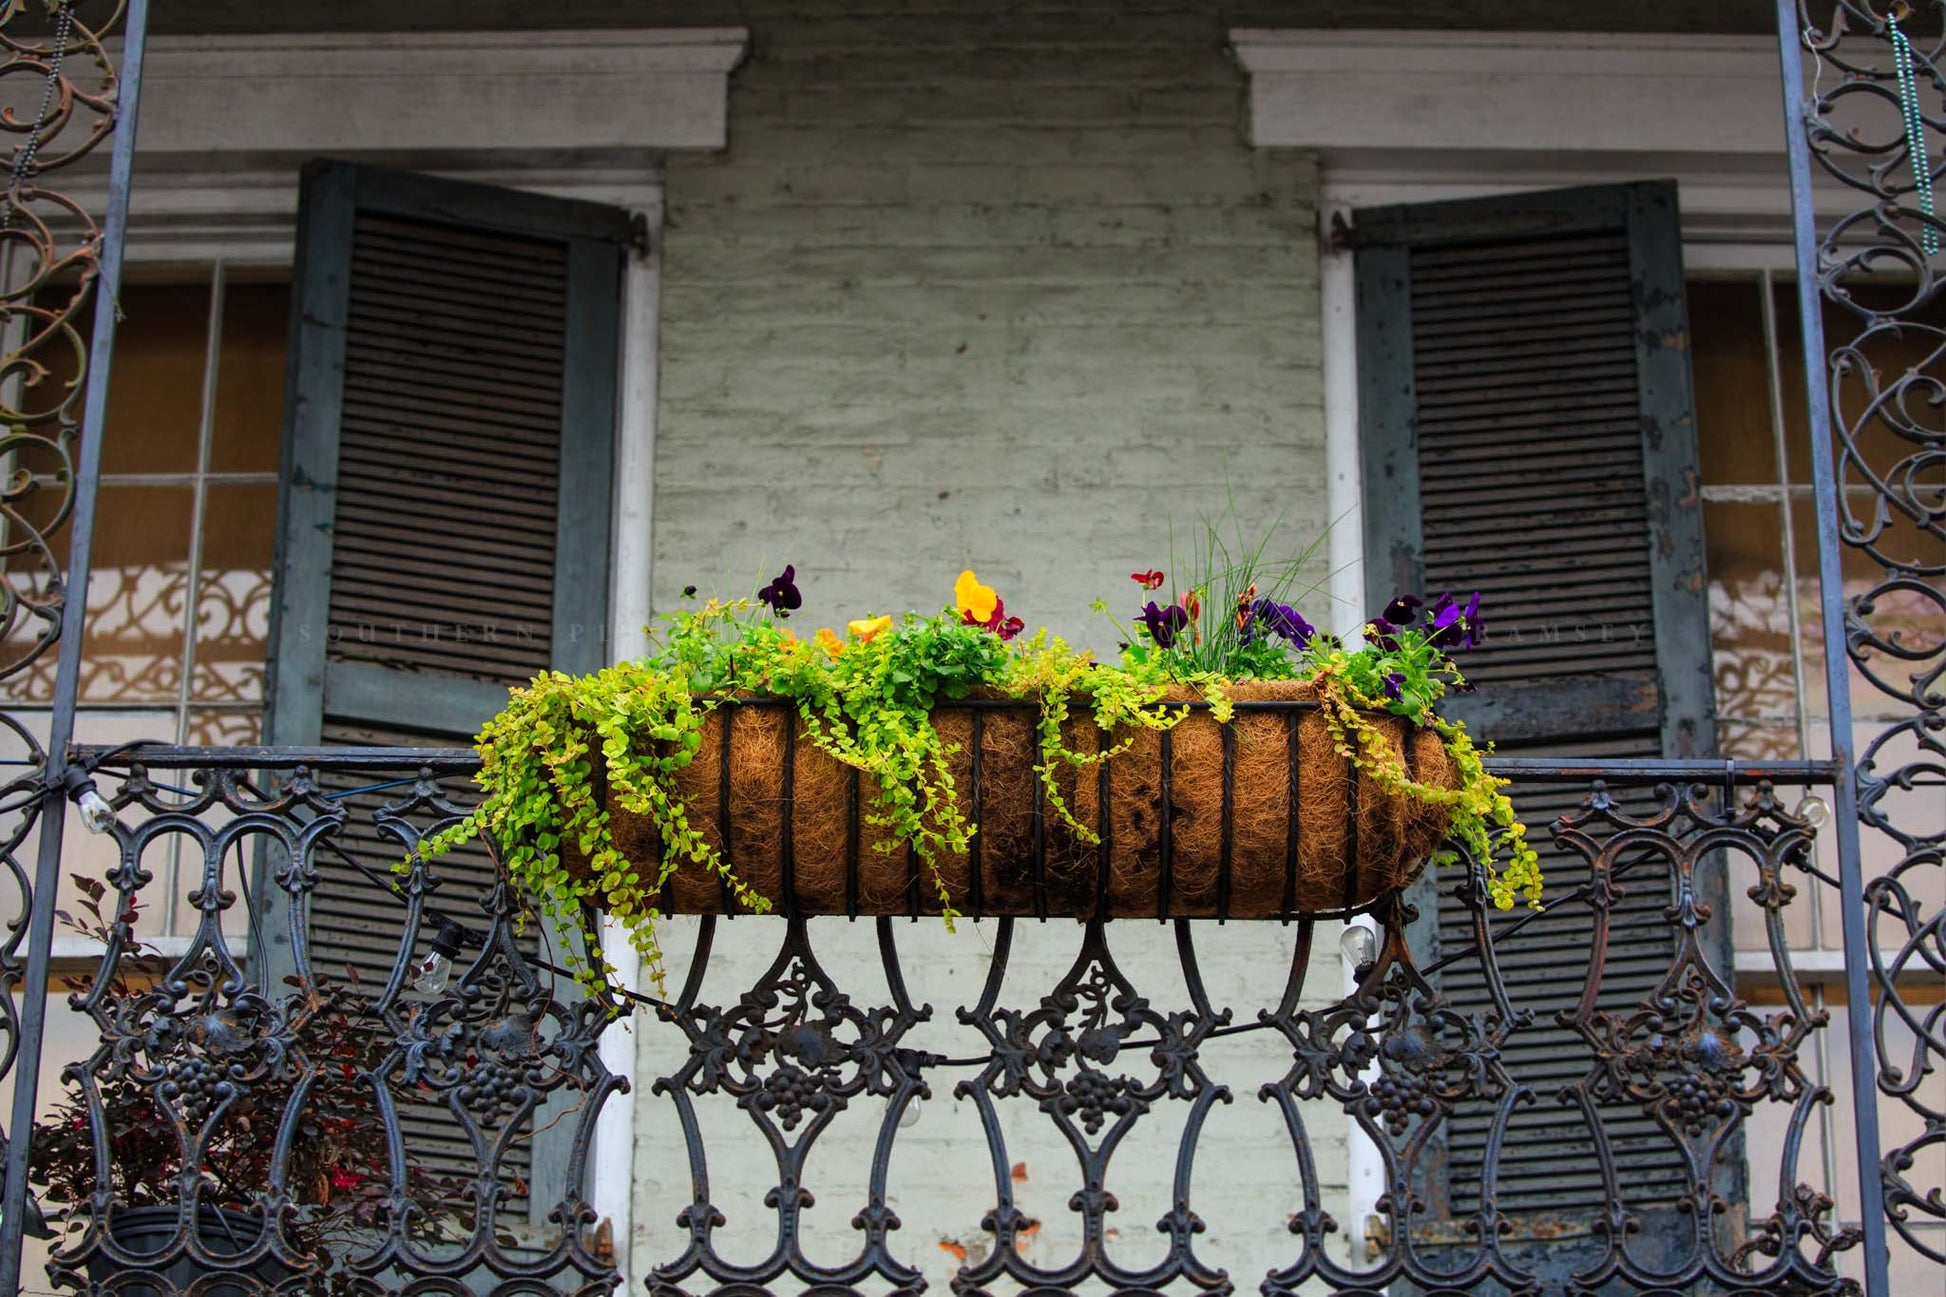 NOLA photography print of pansies and ferns in a hanging planter on a balcony in the French Quarter in New Orleans, Louisiana by Sean Ramsey of Southern Plains Photography.